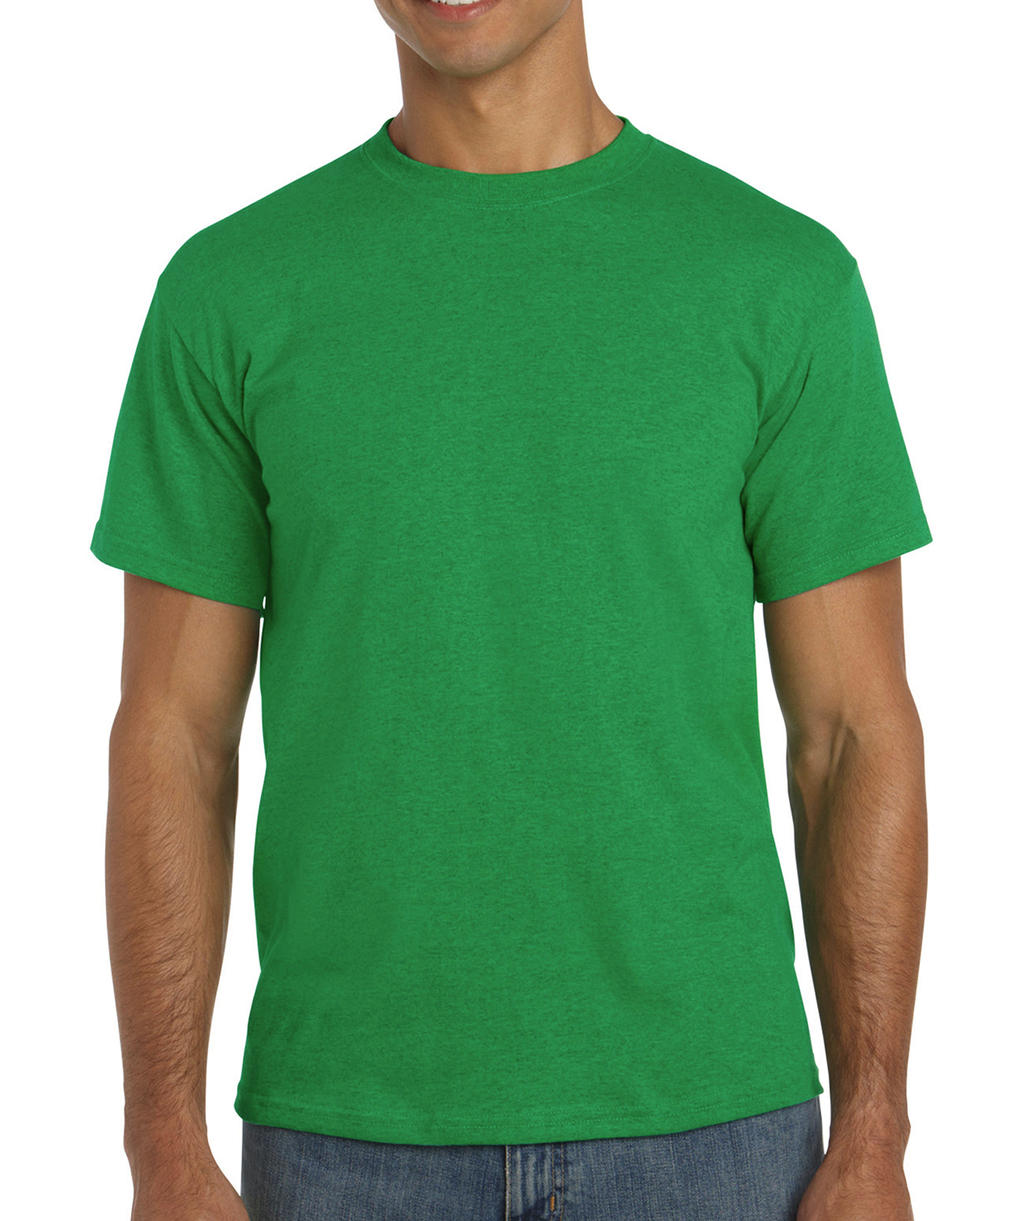  Heavy Cotton Adult T-Shirt in Farbe Antique Irish Green